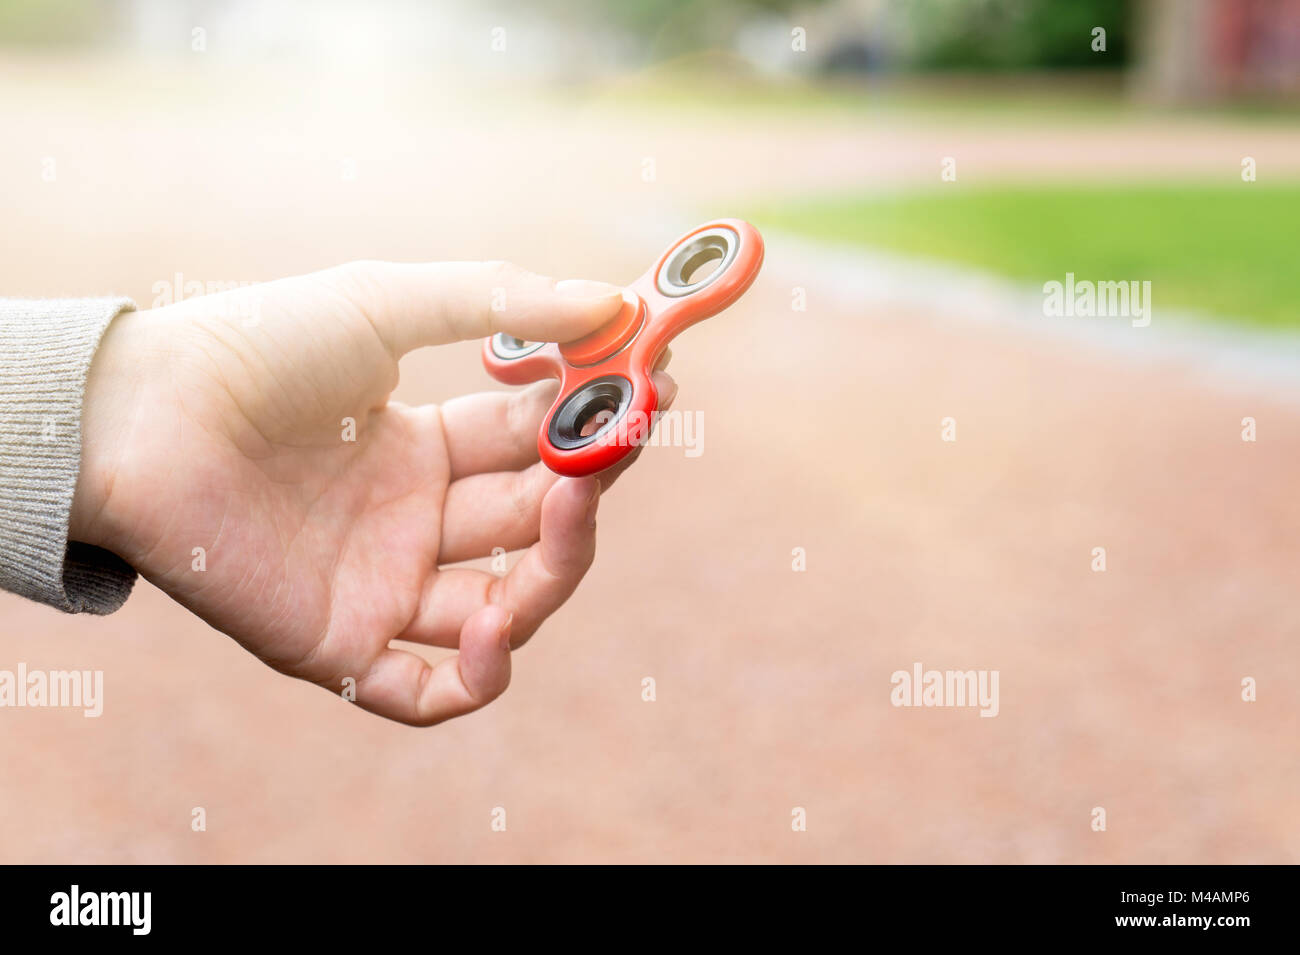 Woman or girl holding red fidget spinner in hand on a sunny summer day in a park outside. Stock Photo